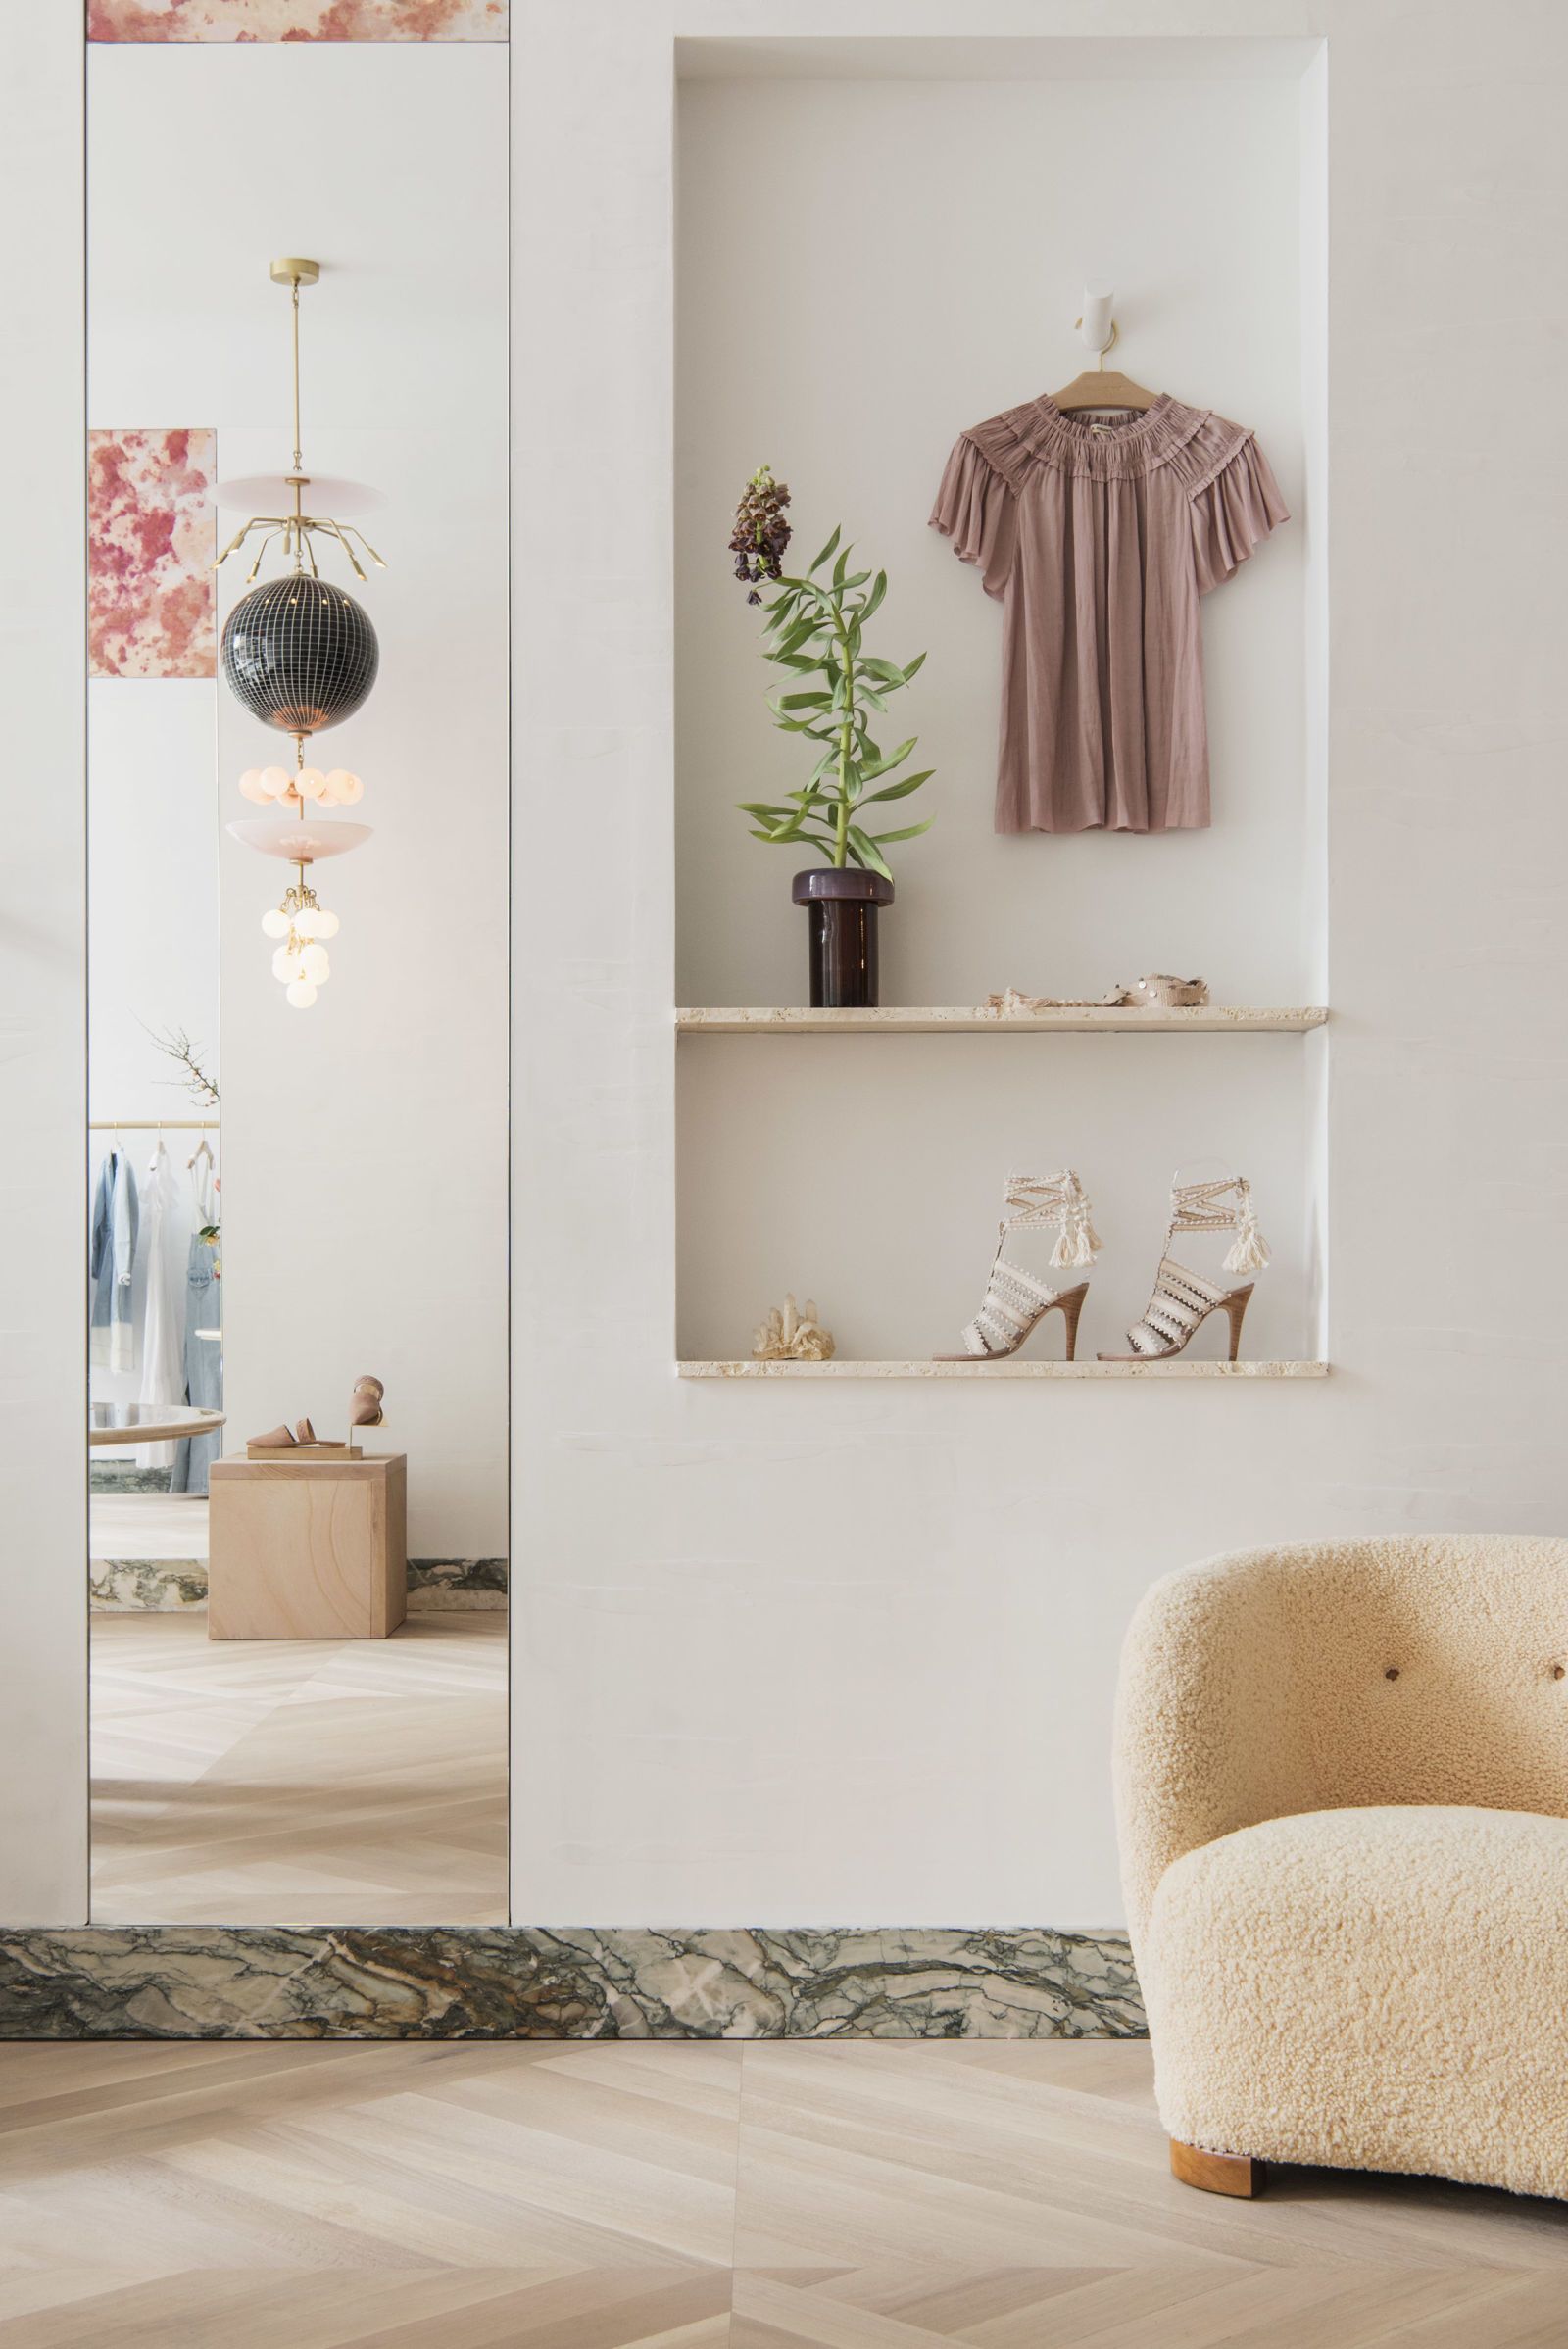 ulla johnson store with gorgeous herringbone floors and a fuzzy shearling chair | coco kelley